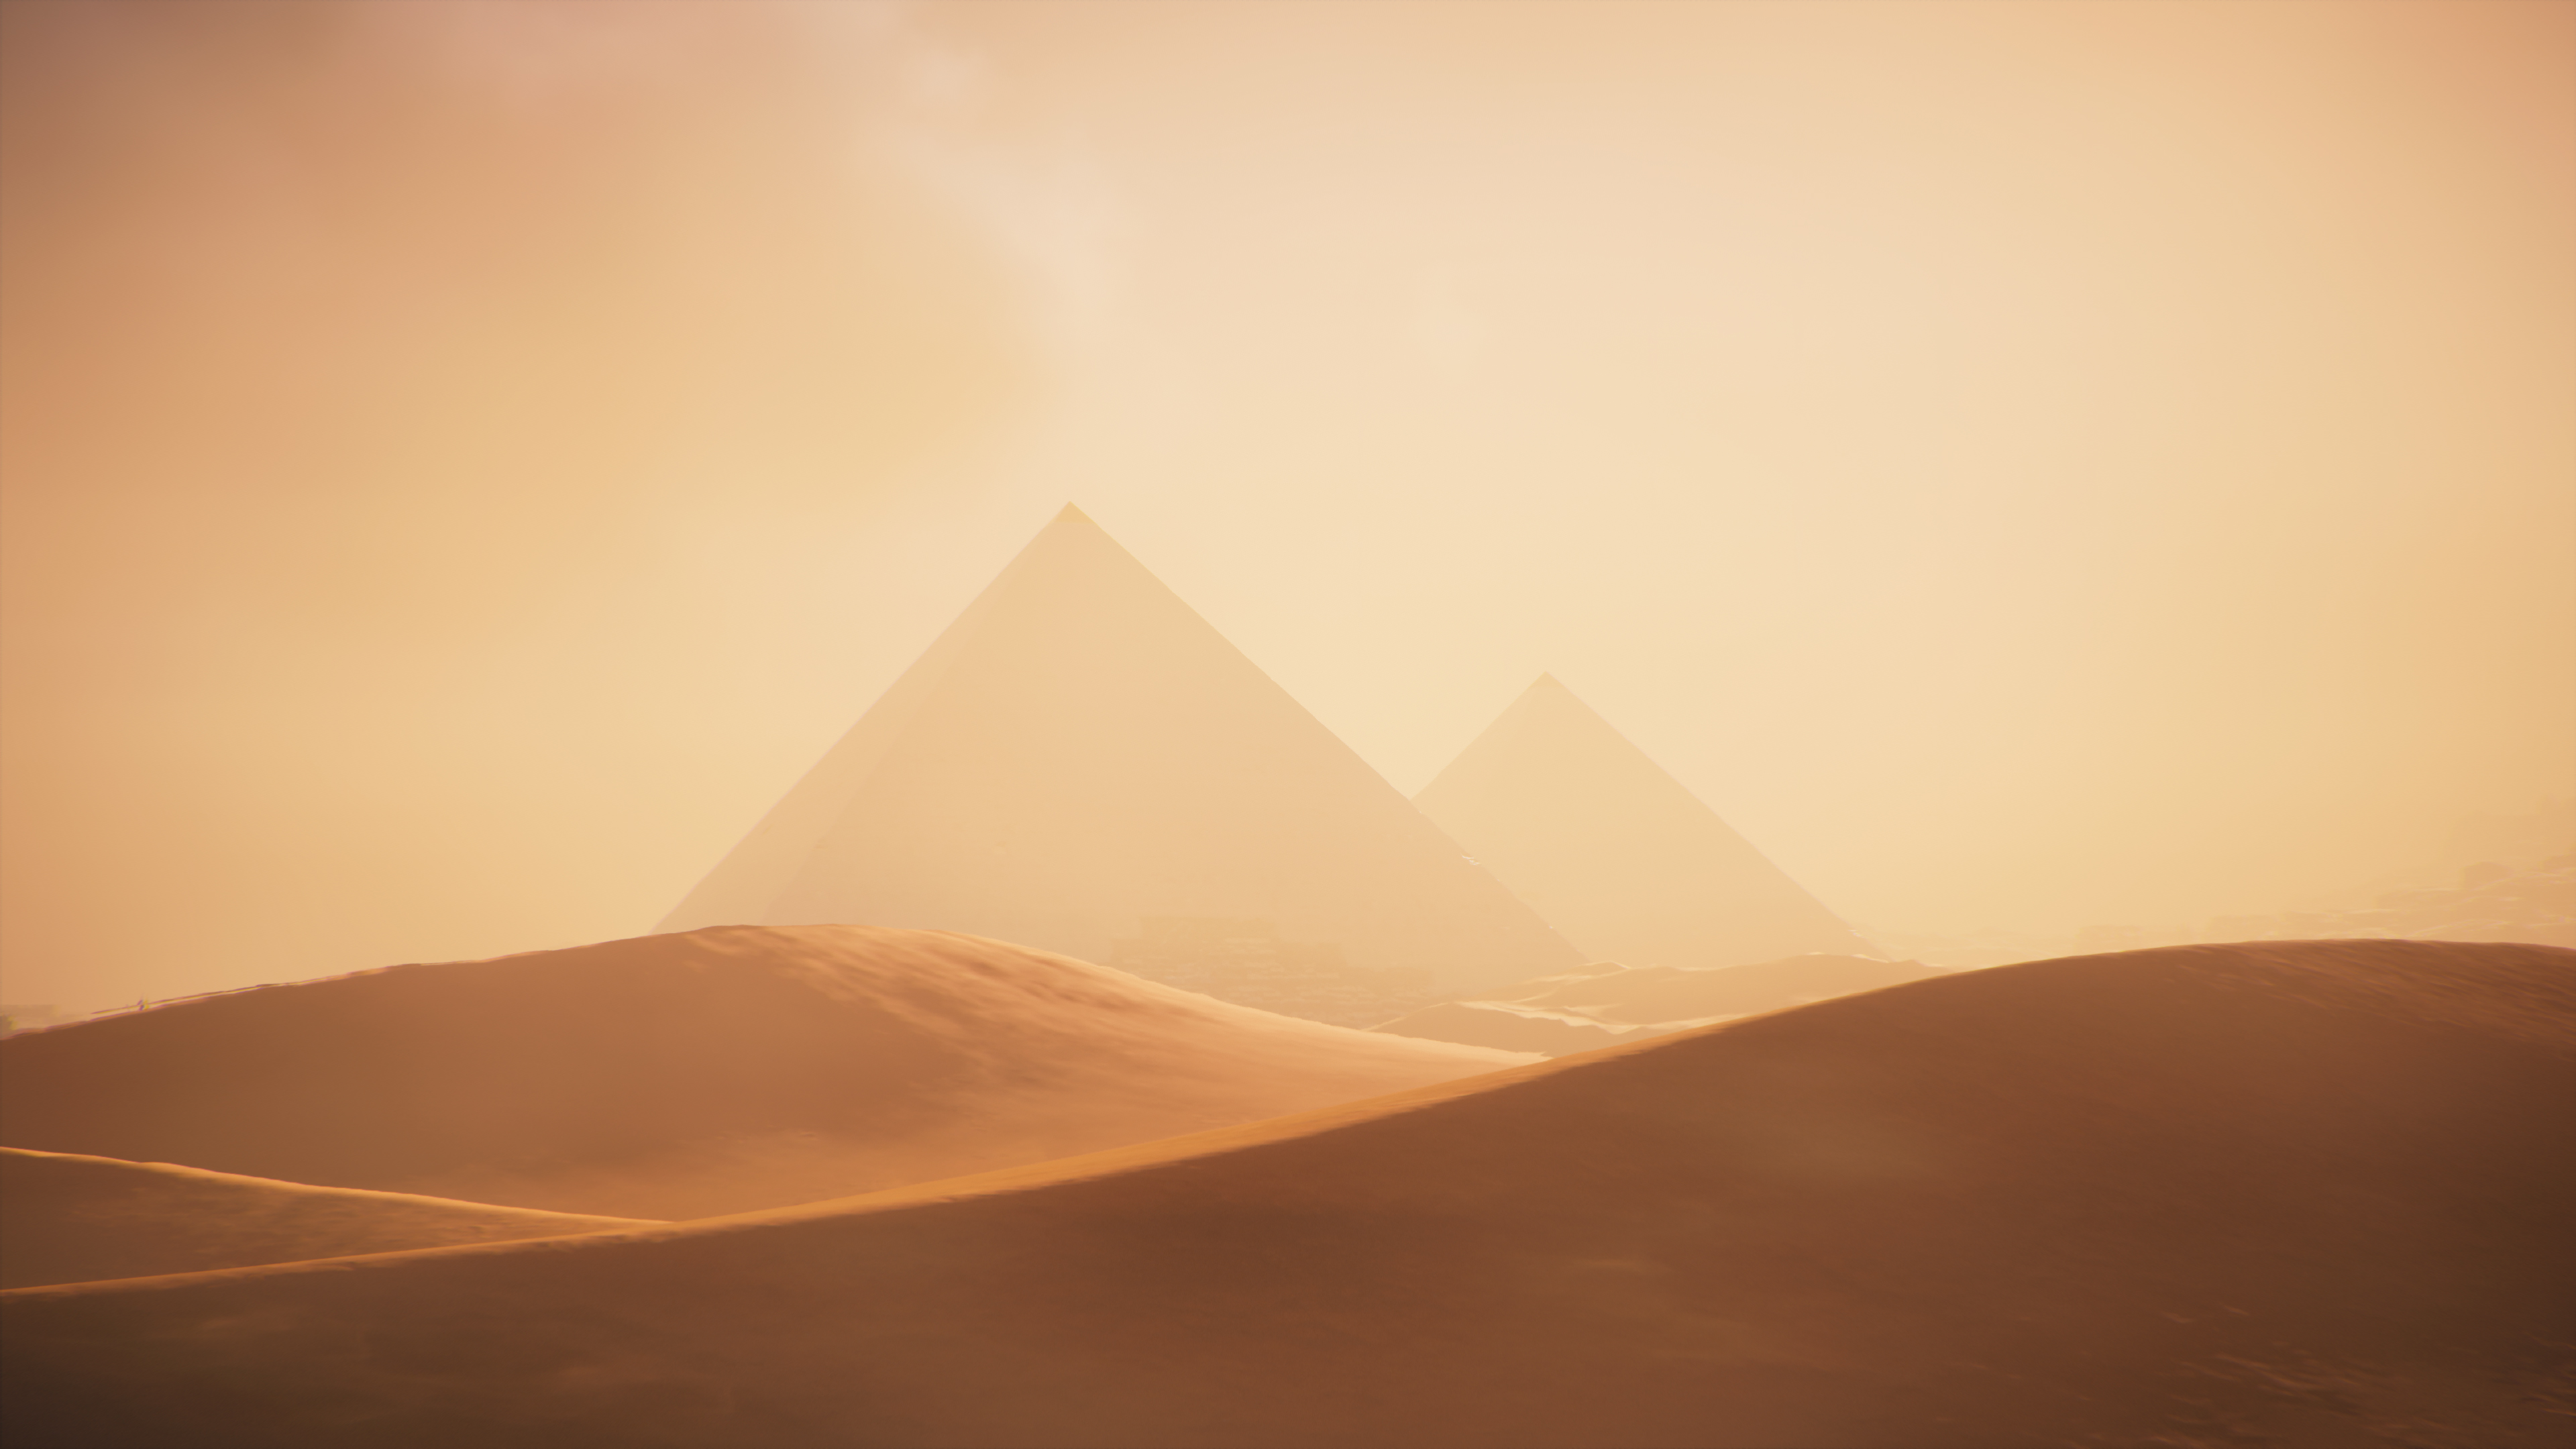 General 3840x2160 Pyramids of Giza Assassin's Creed: Origins desert pyramid video games Egypt sand dunes PC gaming beige